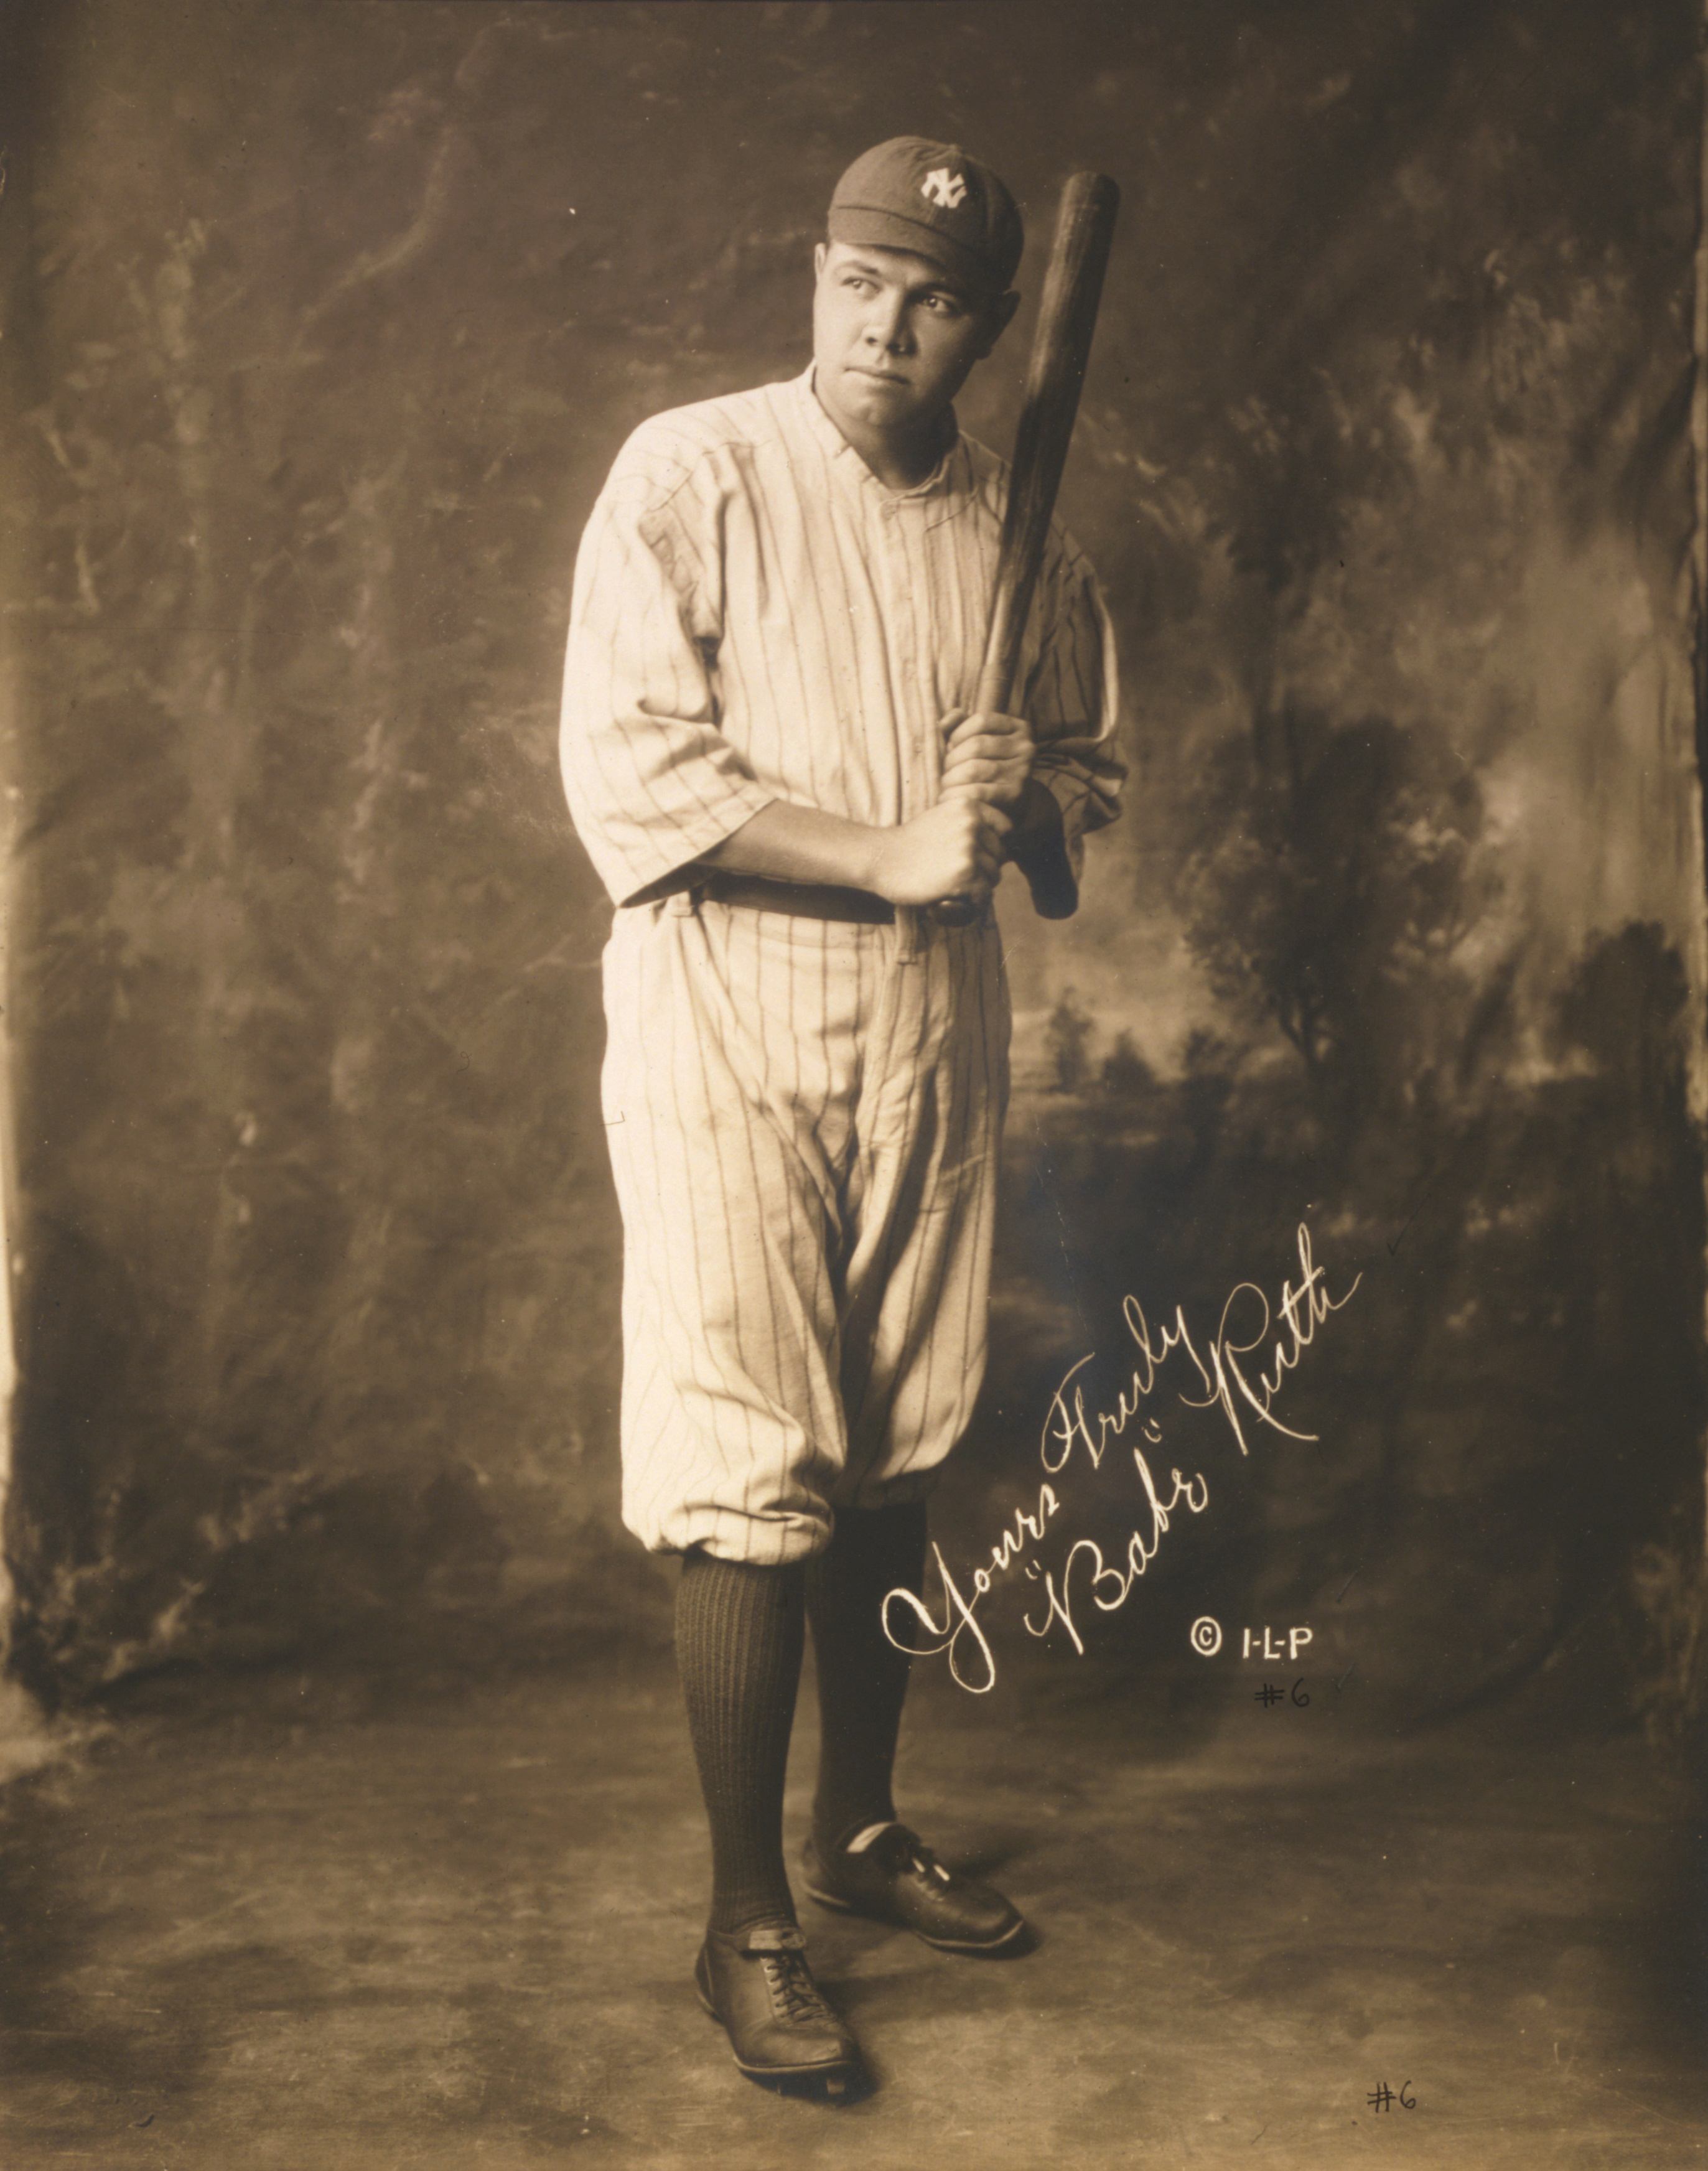 Smithsonian Insider – Seven Babe Ruth facts from the National